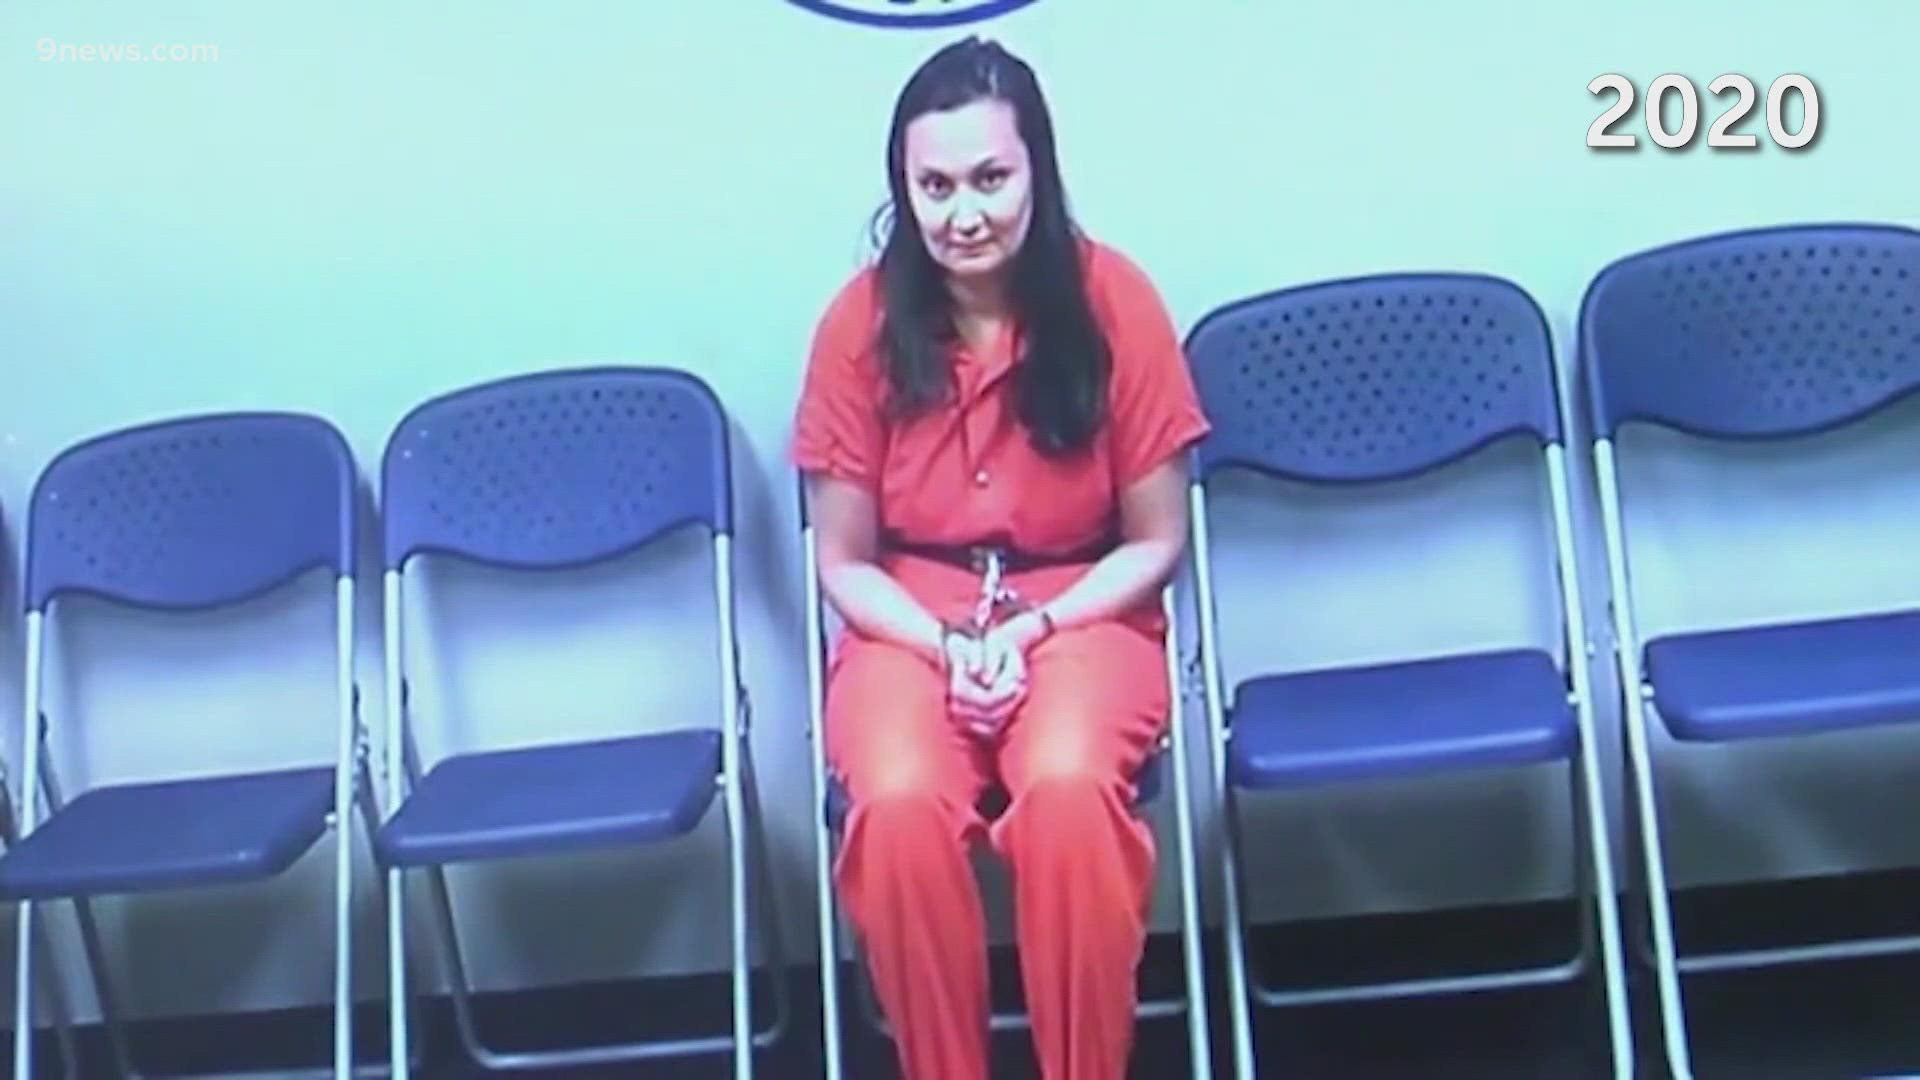 Waitlist at state hospital in Pueblo could cause delay in Letecia Stauch murder trial